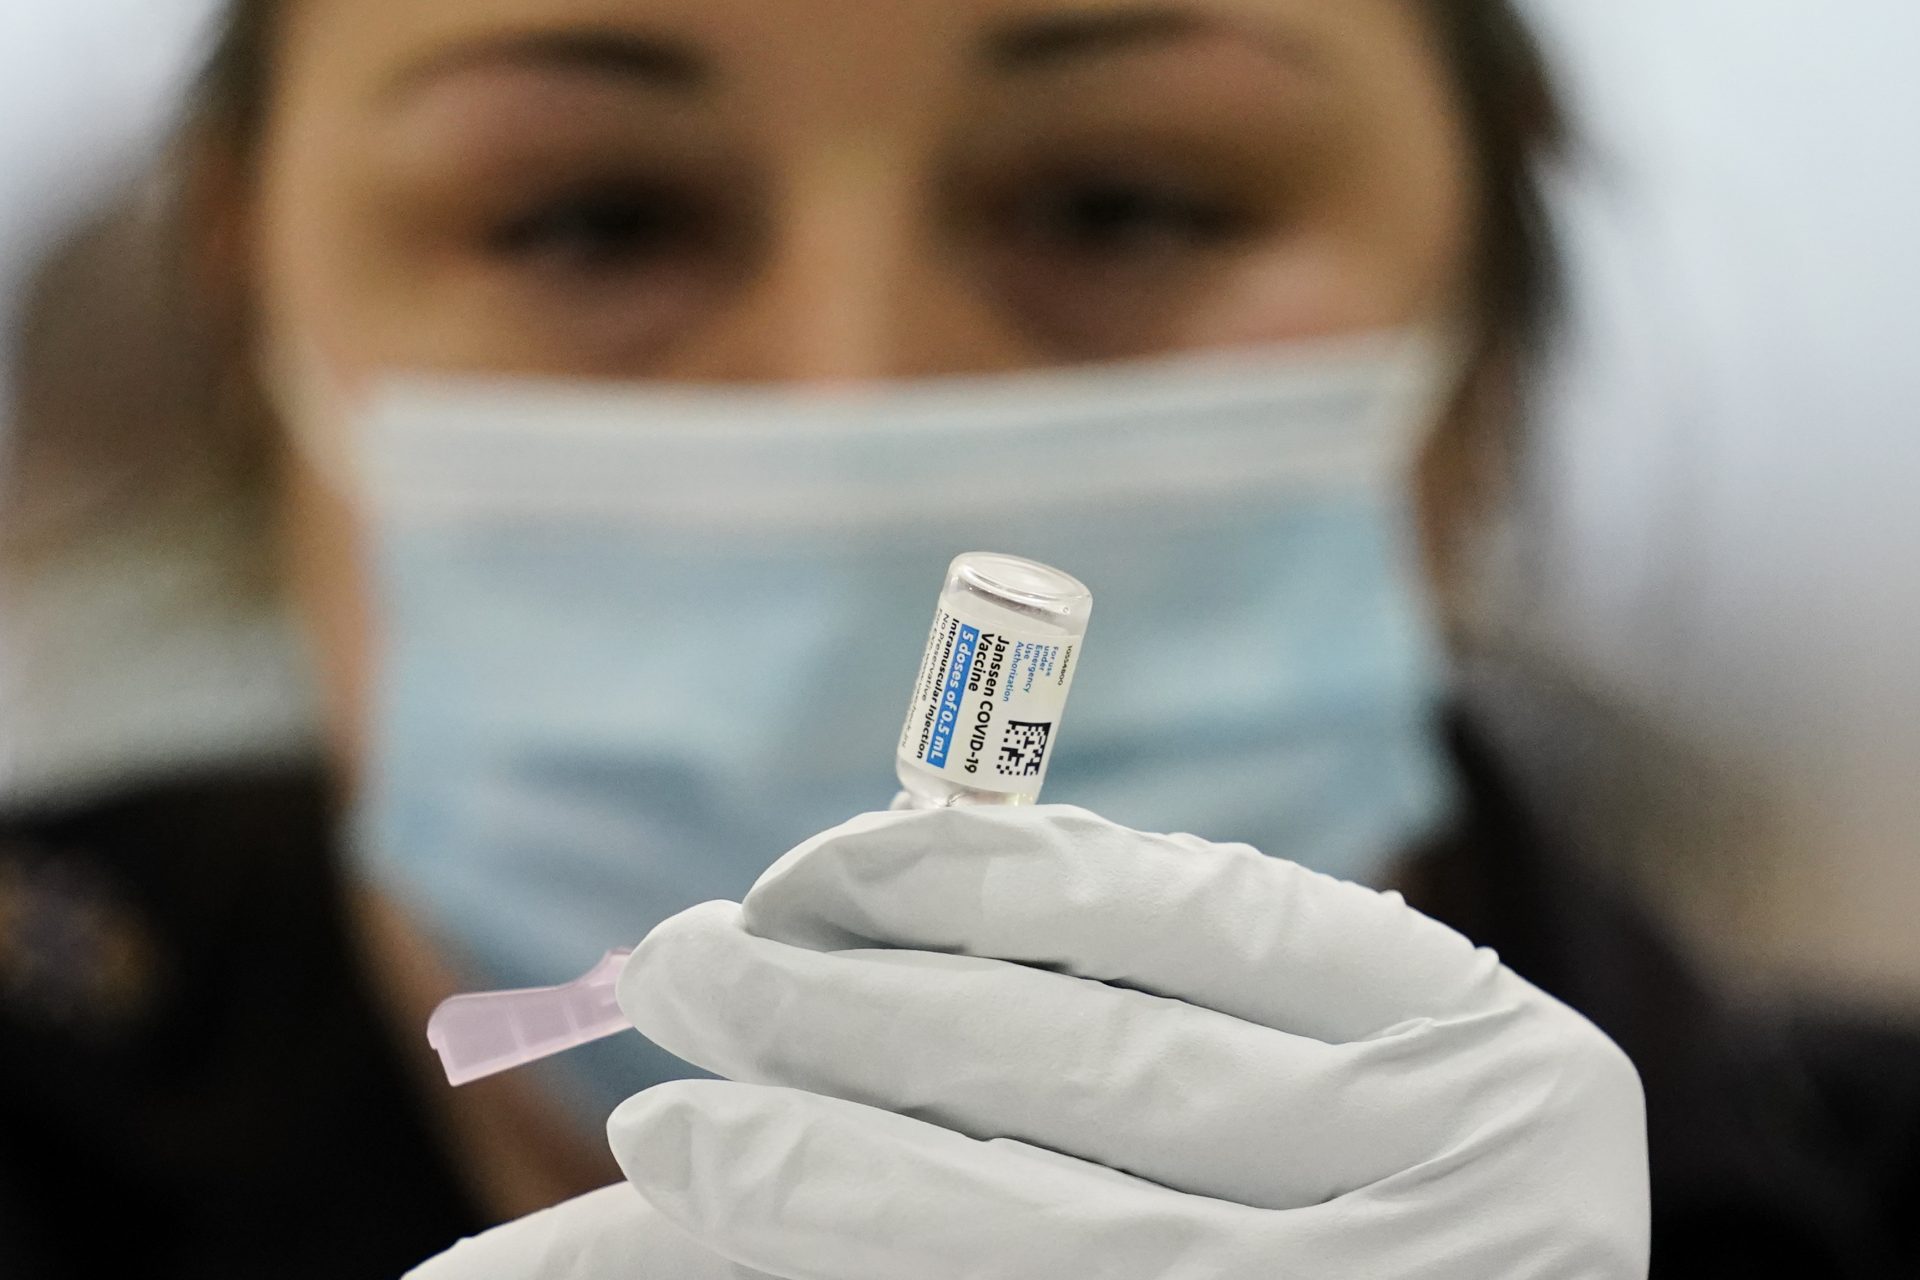 A member of the Philadelphia Fire Department prepares a dose of the Johnson & Johnson COVID-19 vaccine at a vaccination site setup at a Salvation Army location in Philadelphia, Friday, March 26, 2021.